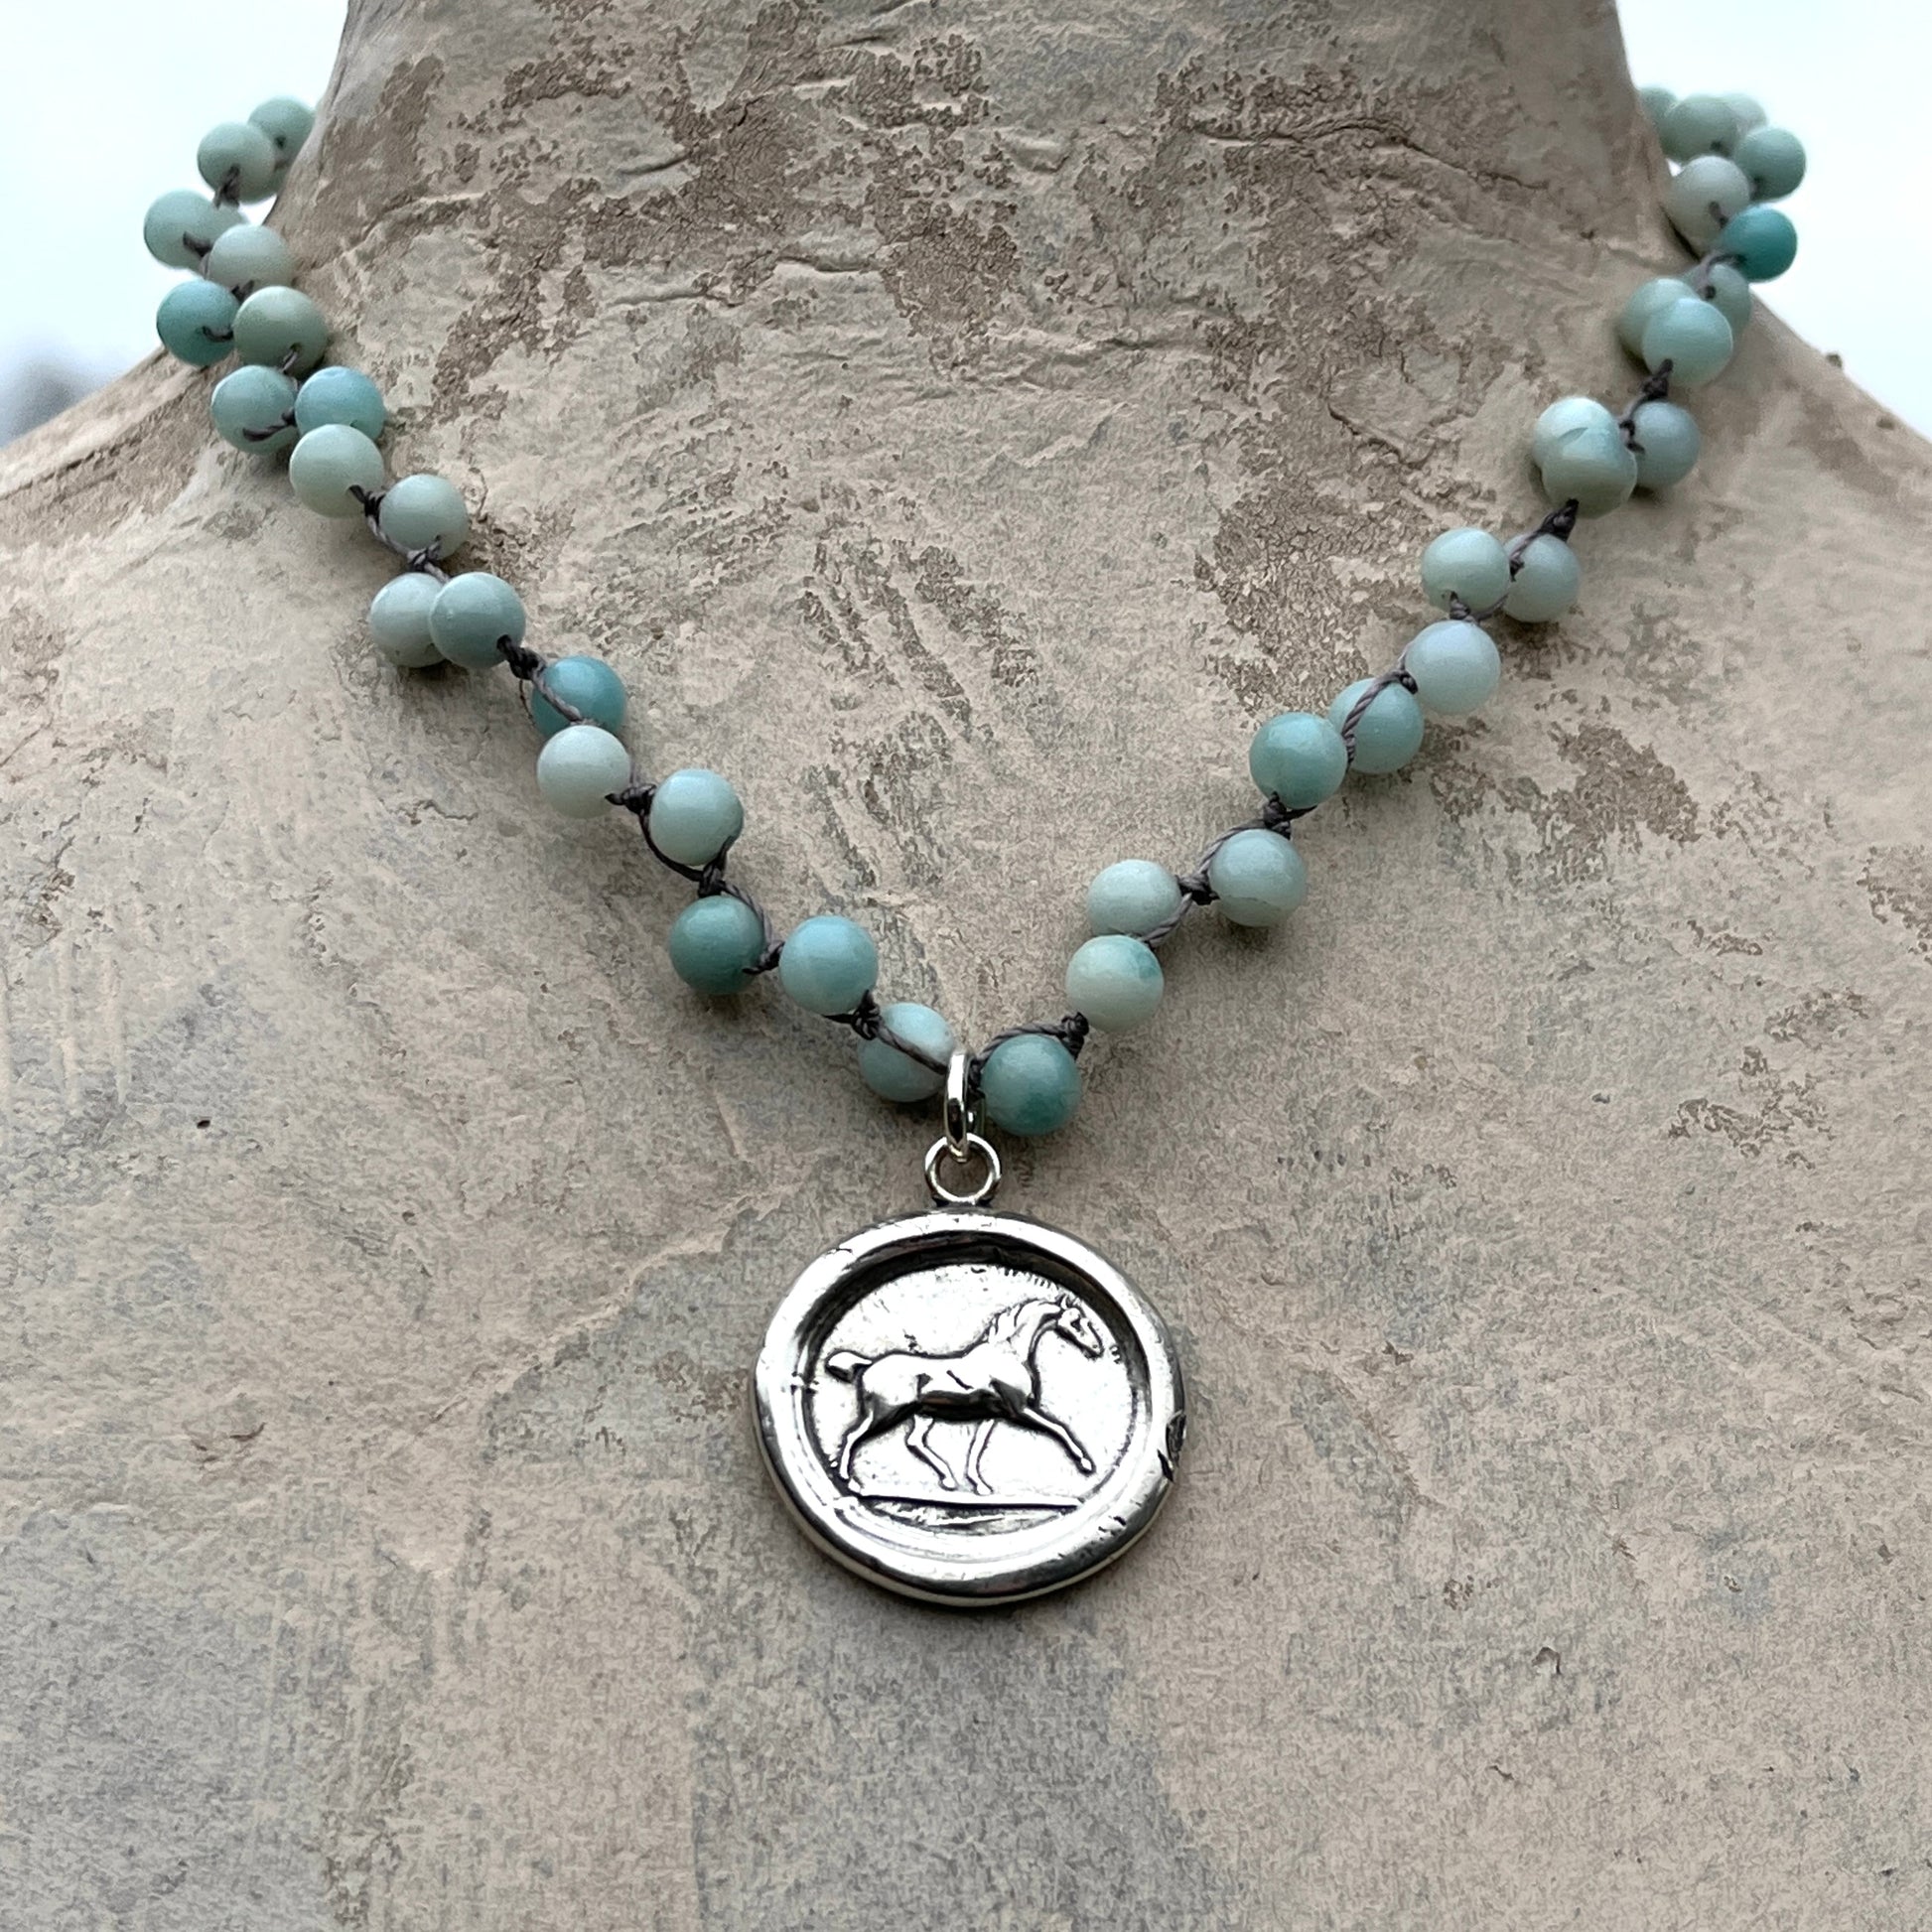 Equestrian Wax Stamp Necklace